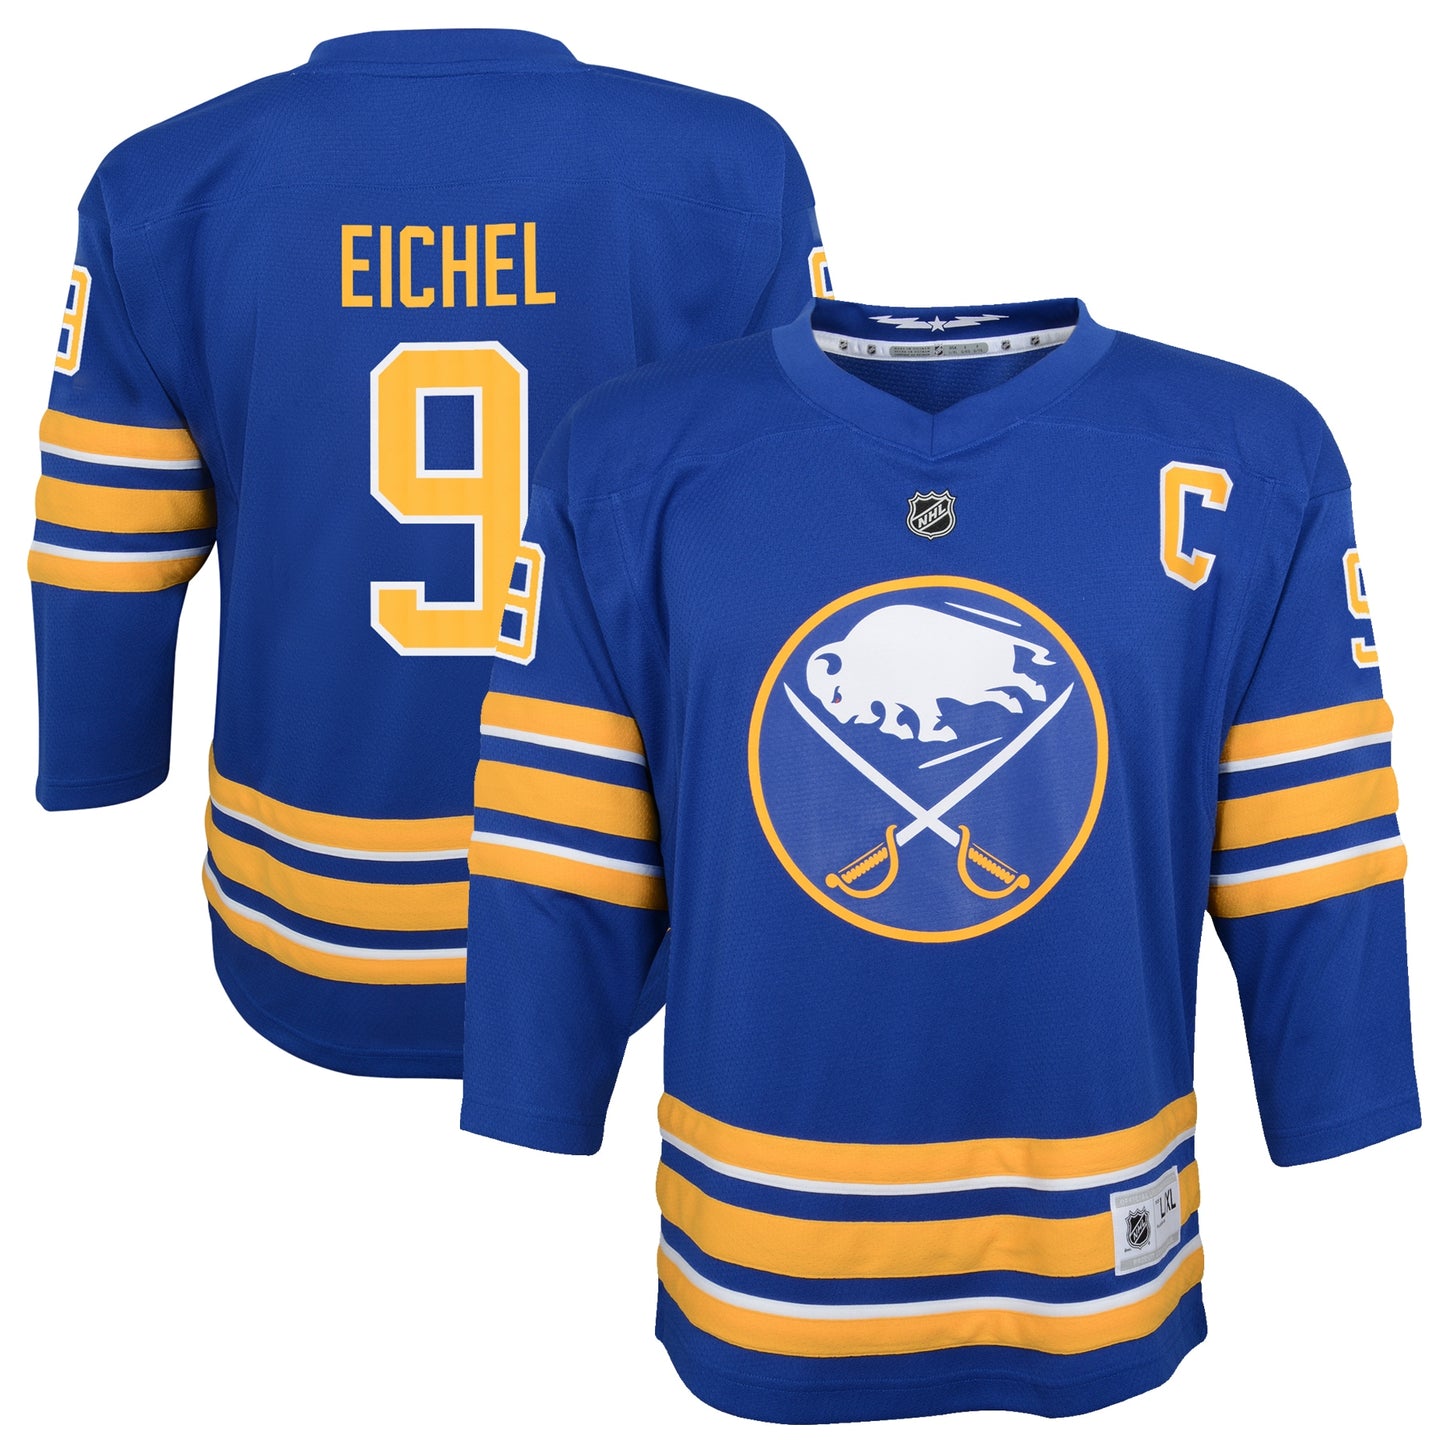 Jack Eichel Buffalo Sabres Youth Home Replica Player Jersey - Royal